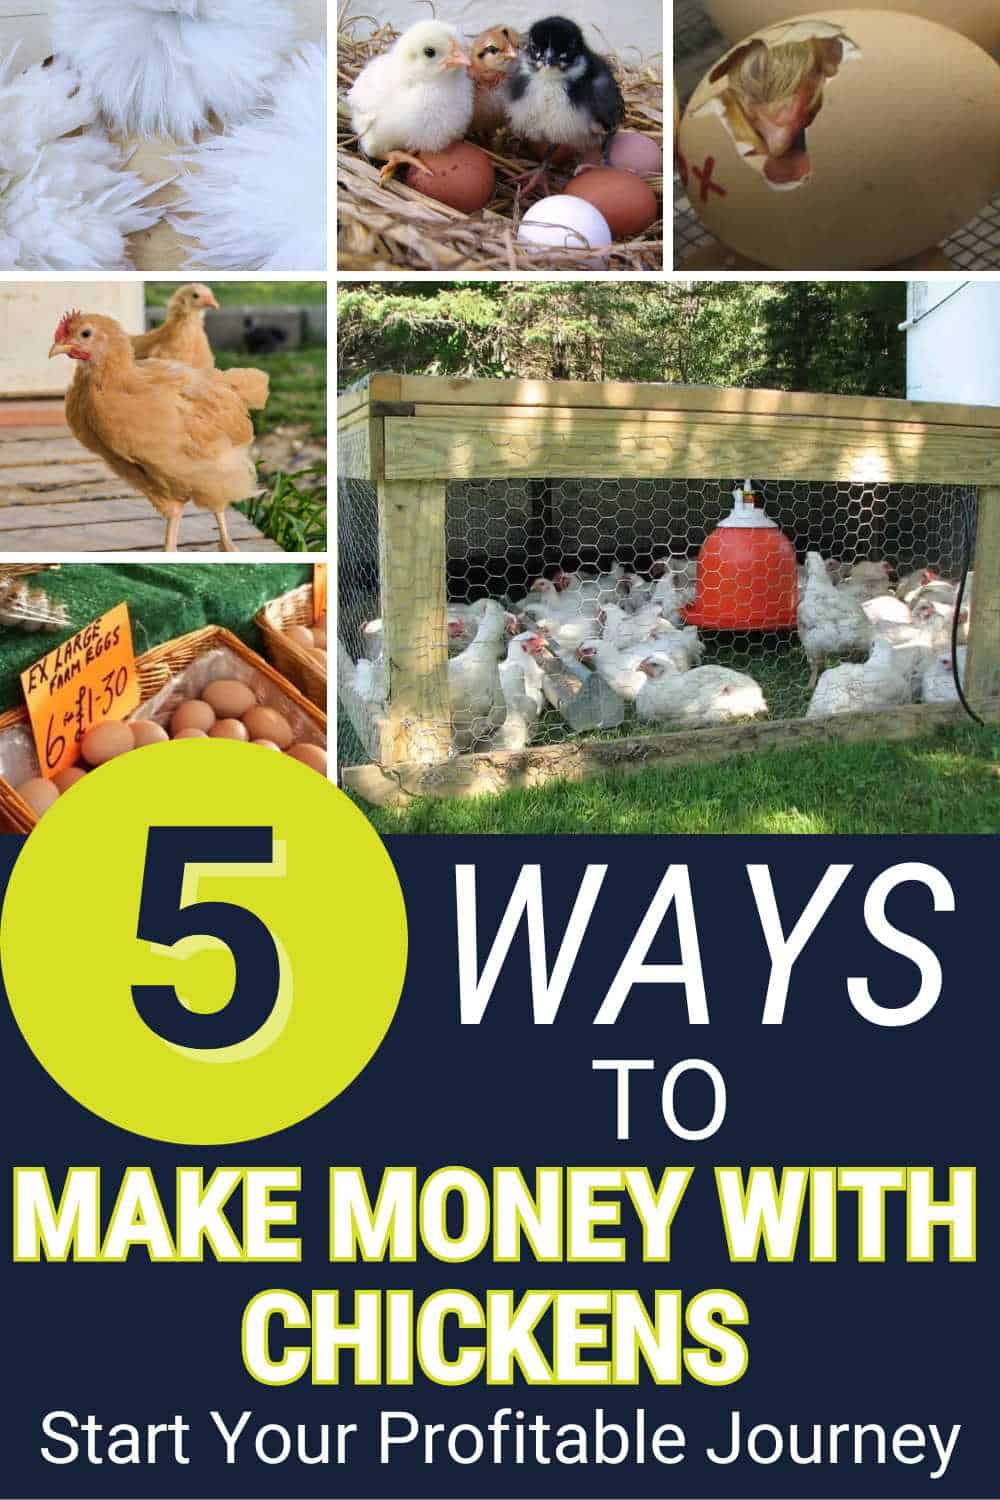 Make Money With Chickens